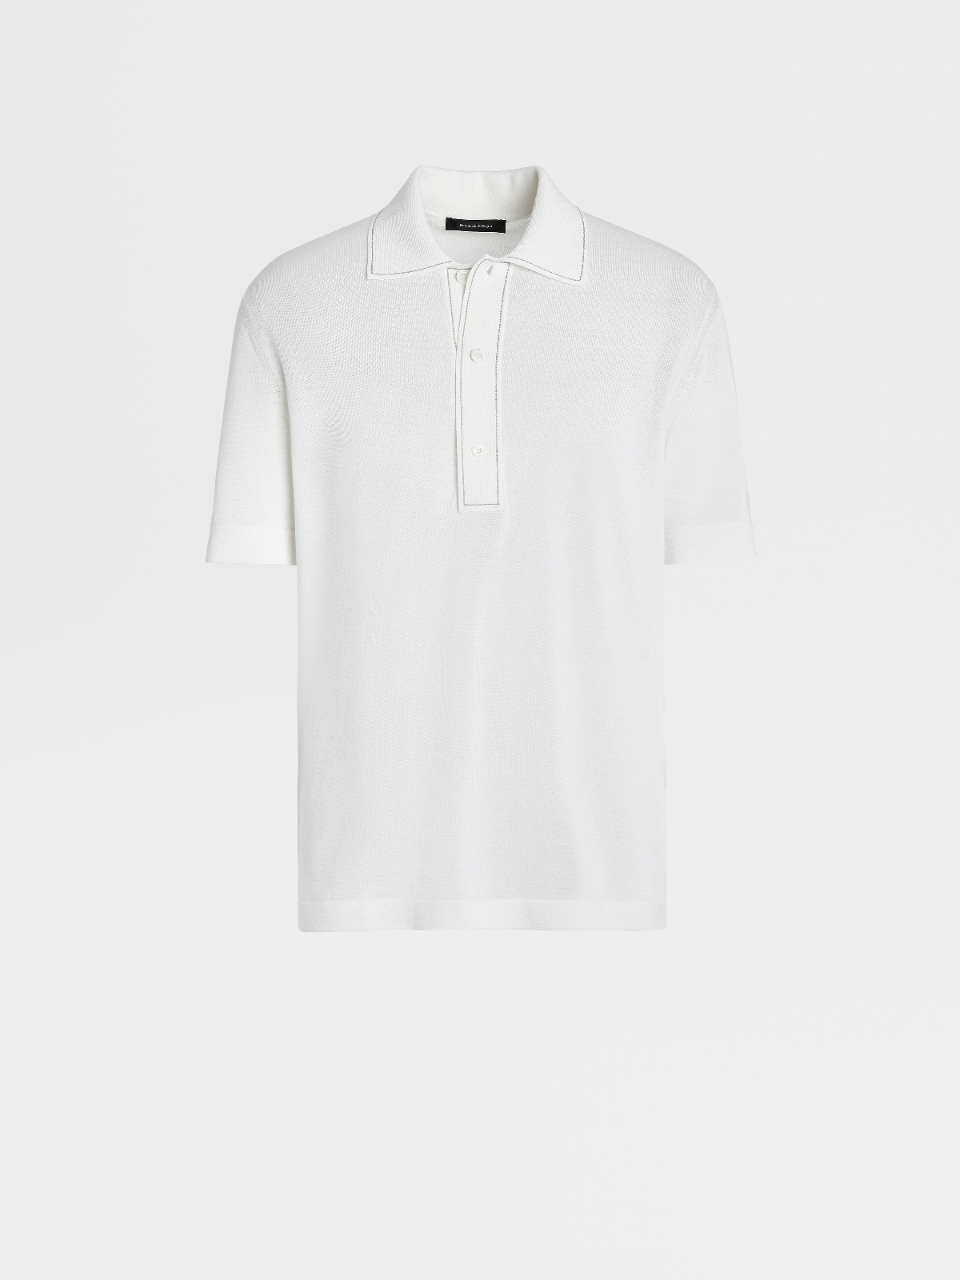 White Silk and Cotton Knit Short-sleeve Polo